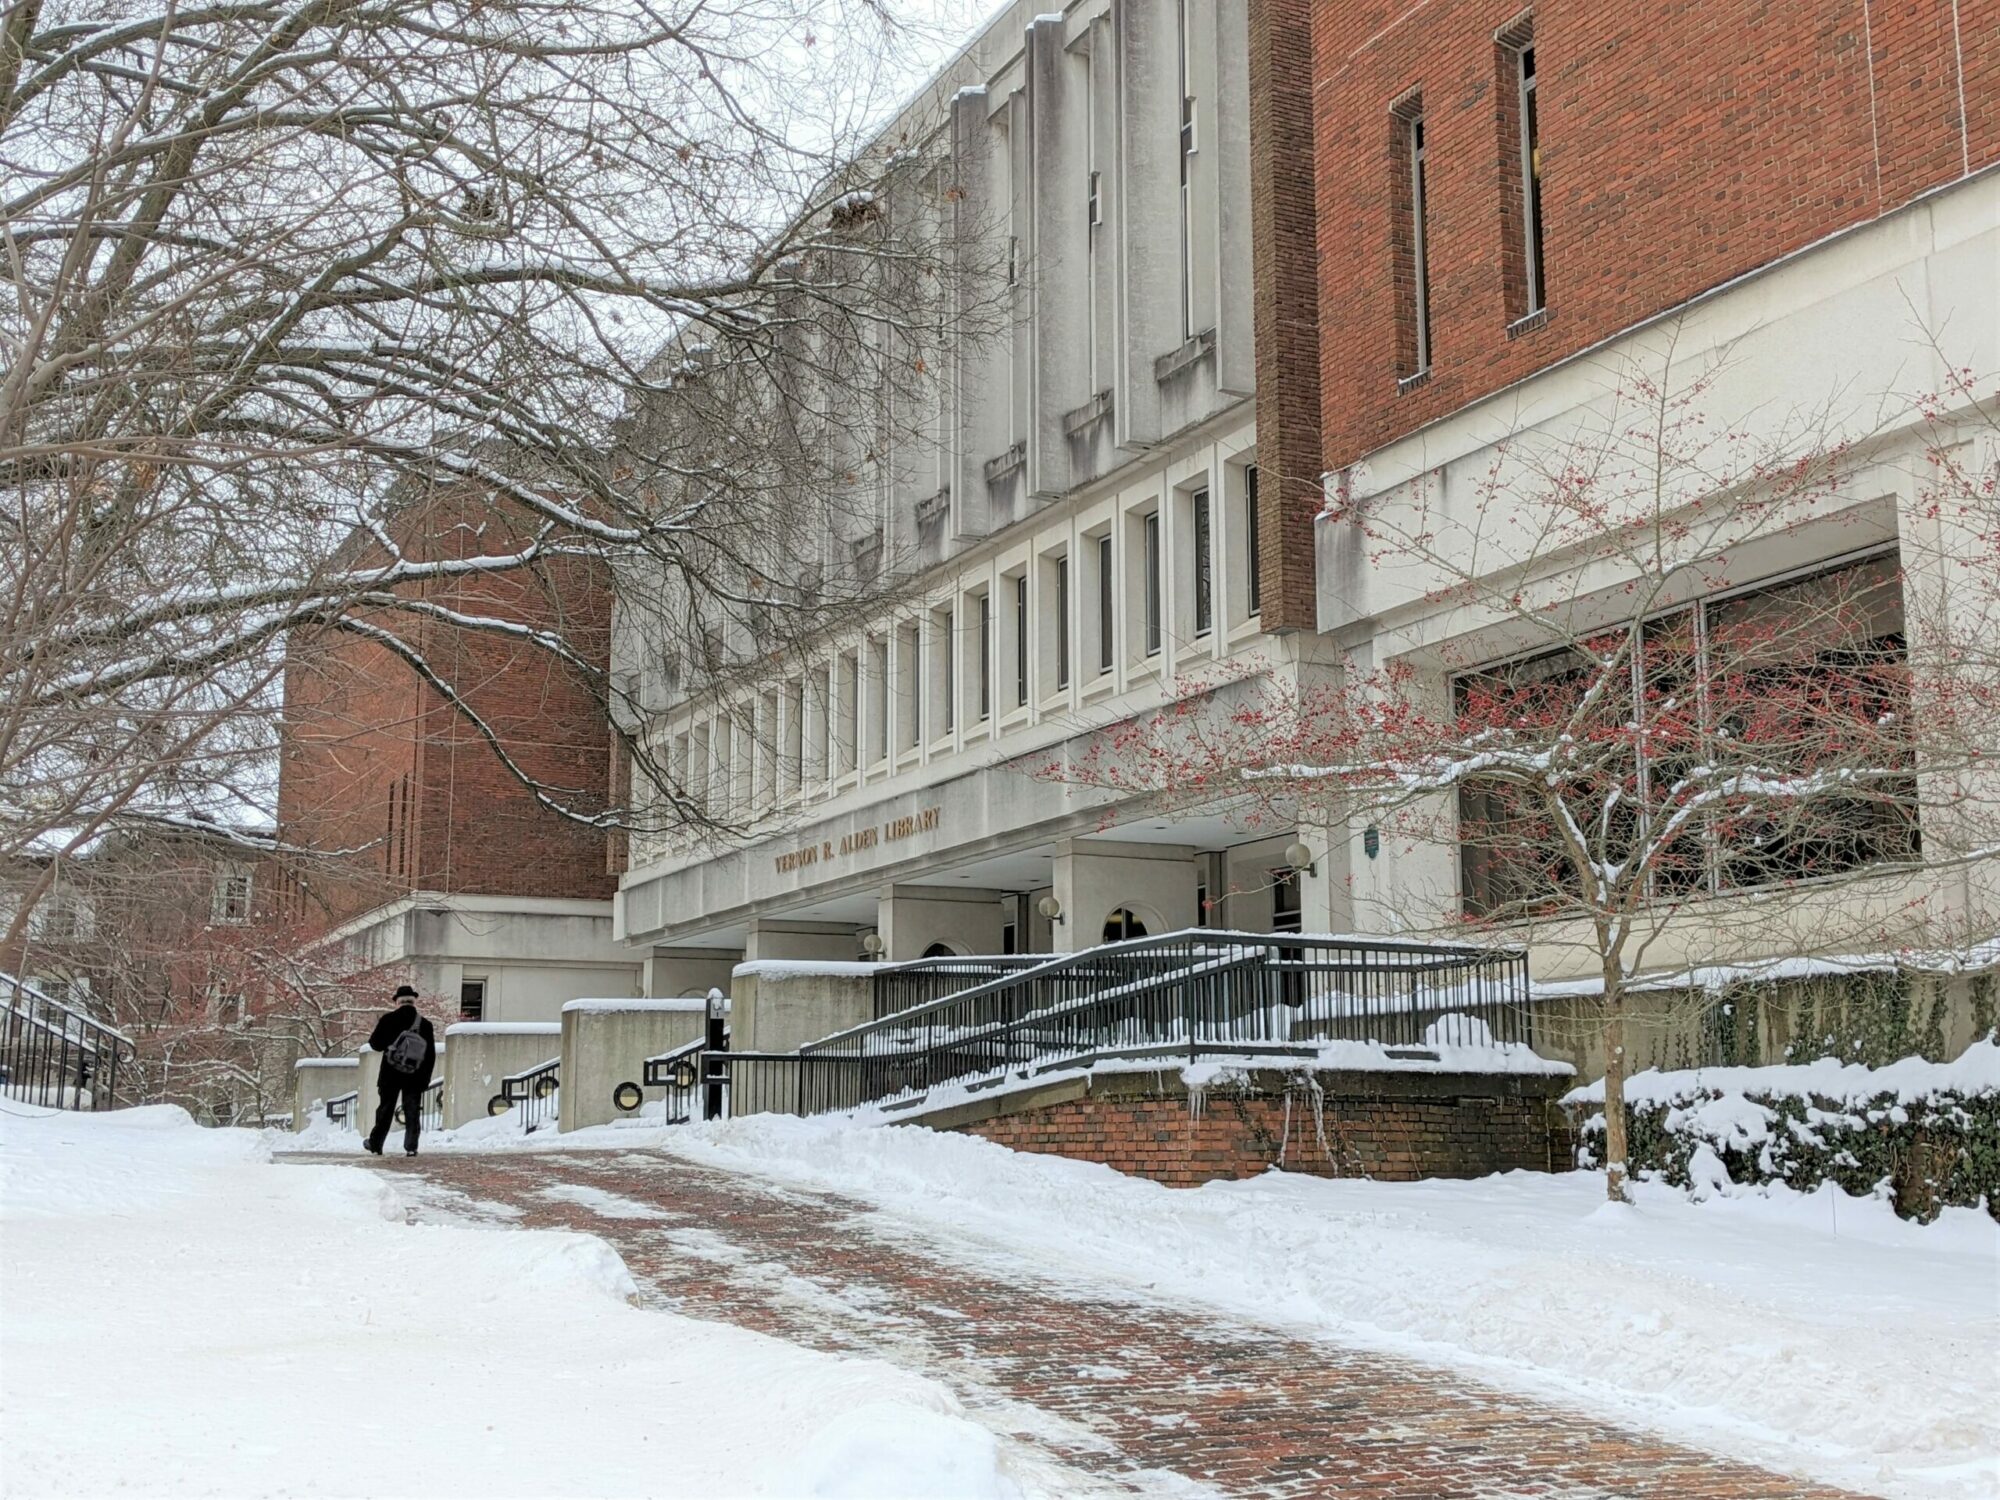 Exterior of the Vernon R. Alden Library with snow on the ground and one figure